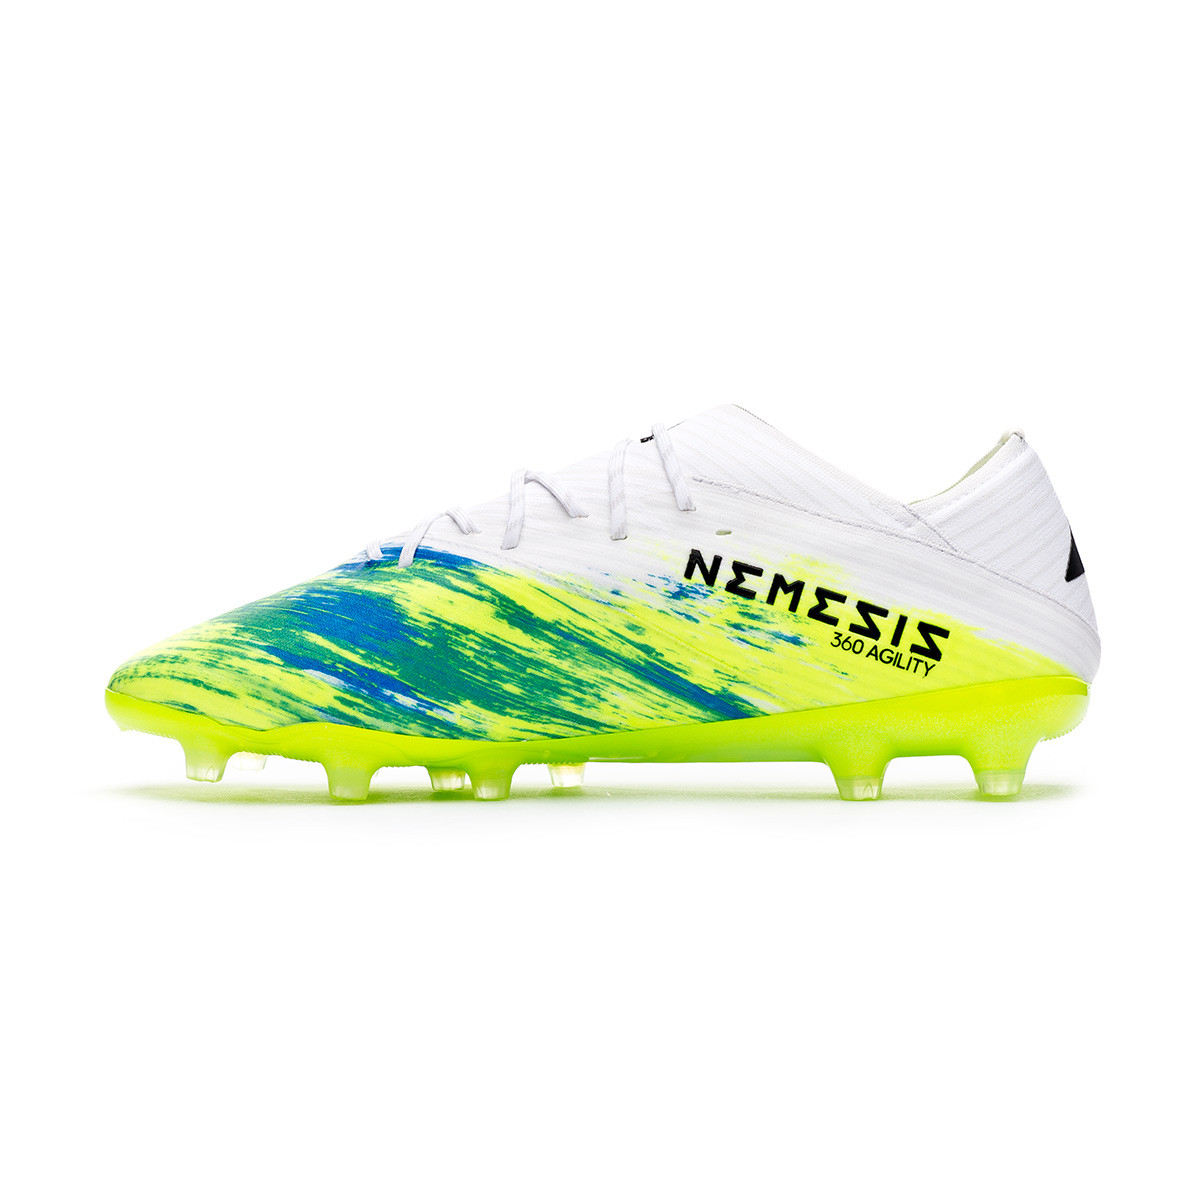 adidas green and white football boots